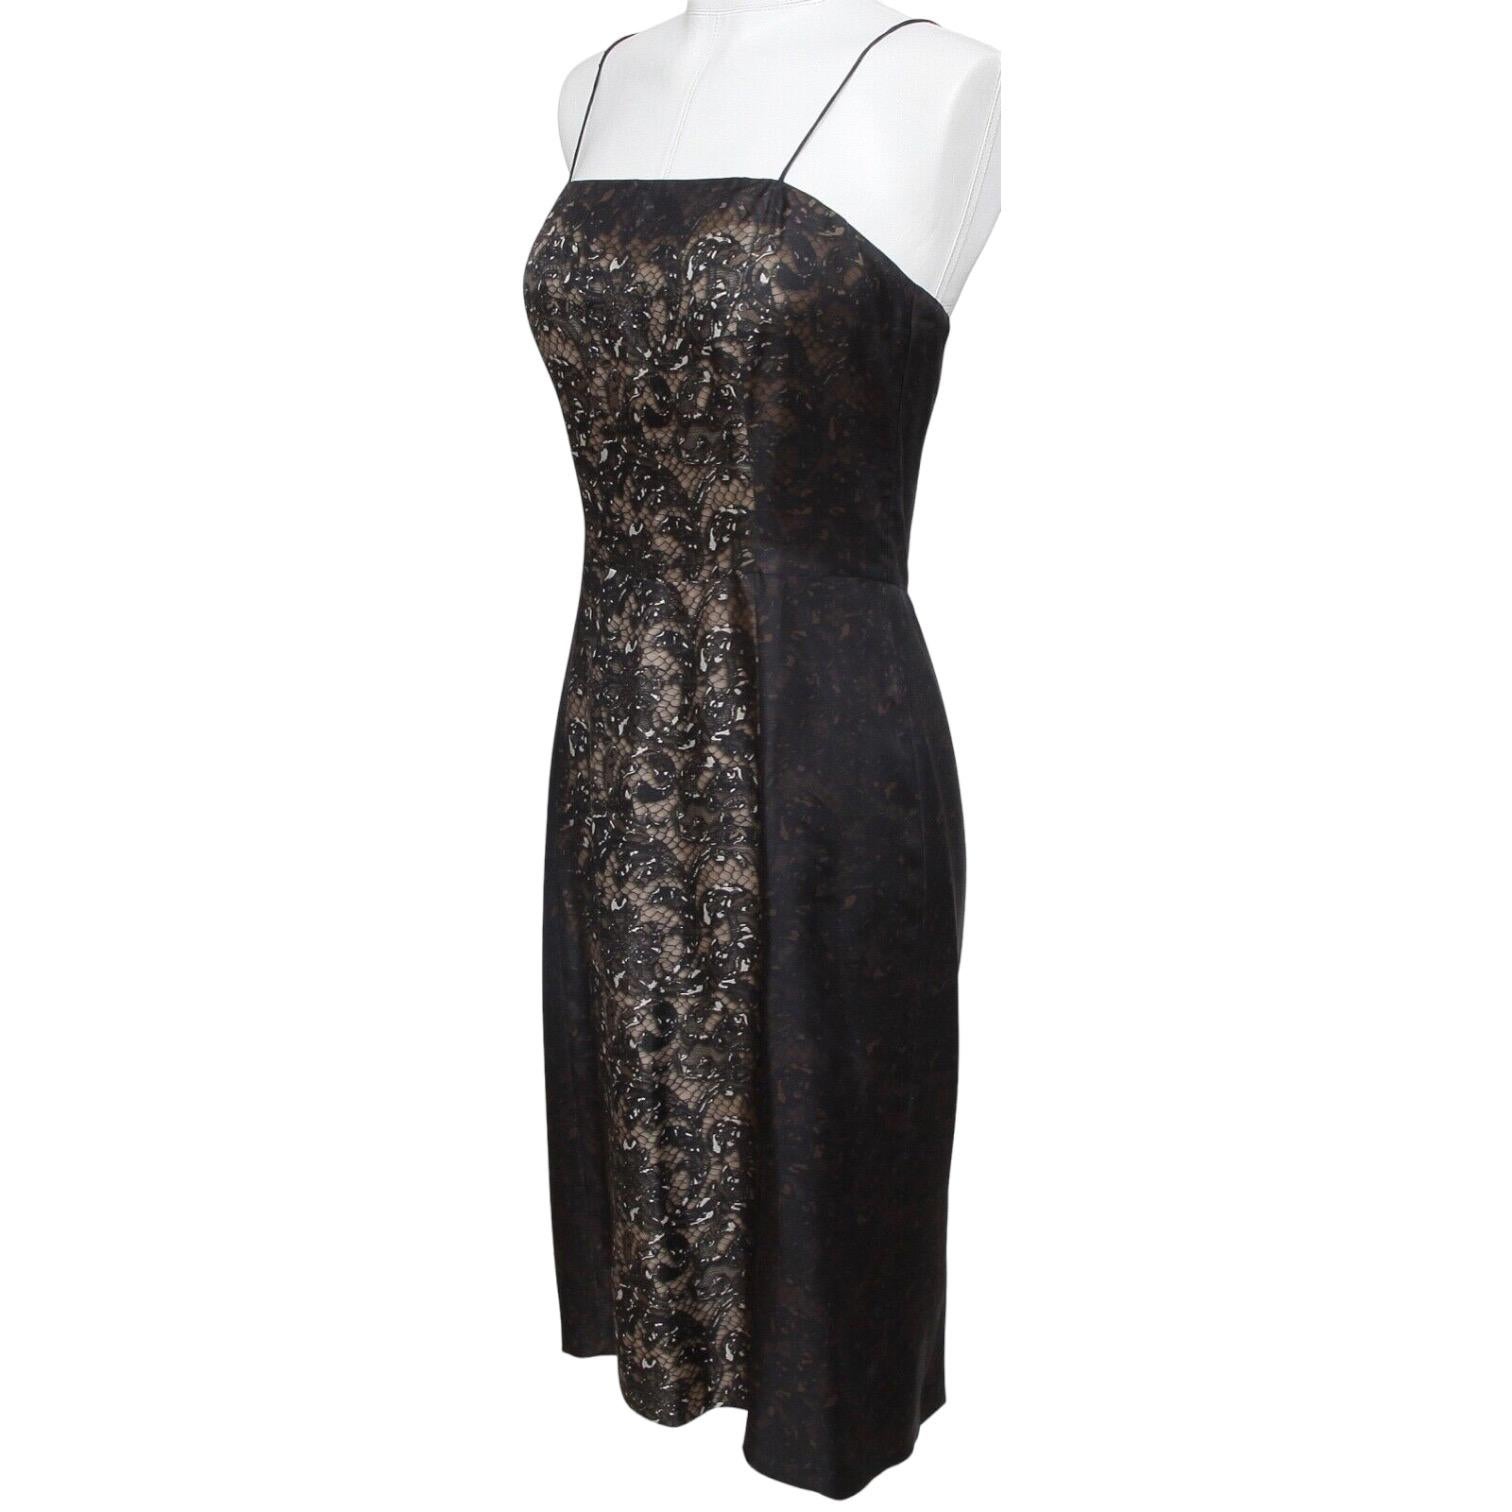 PRADA Dress Spaghetti Strap Silk Brown Black Lace Print Sz 40 In Excellent Condition For Sale In Hollywood, FL